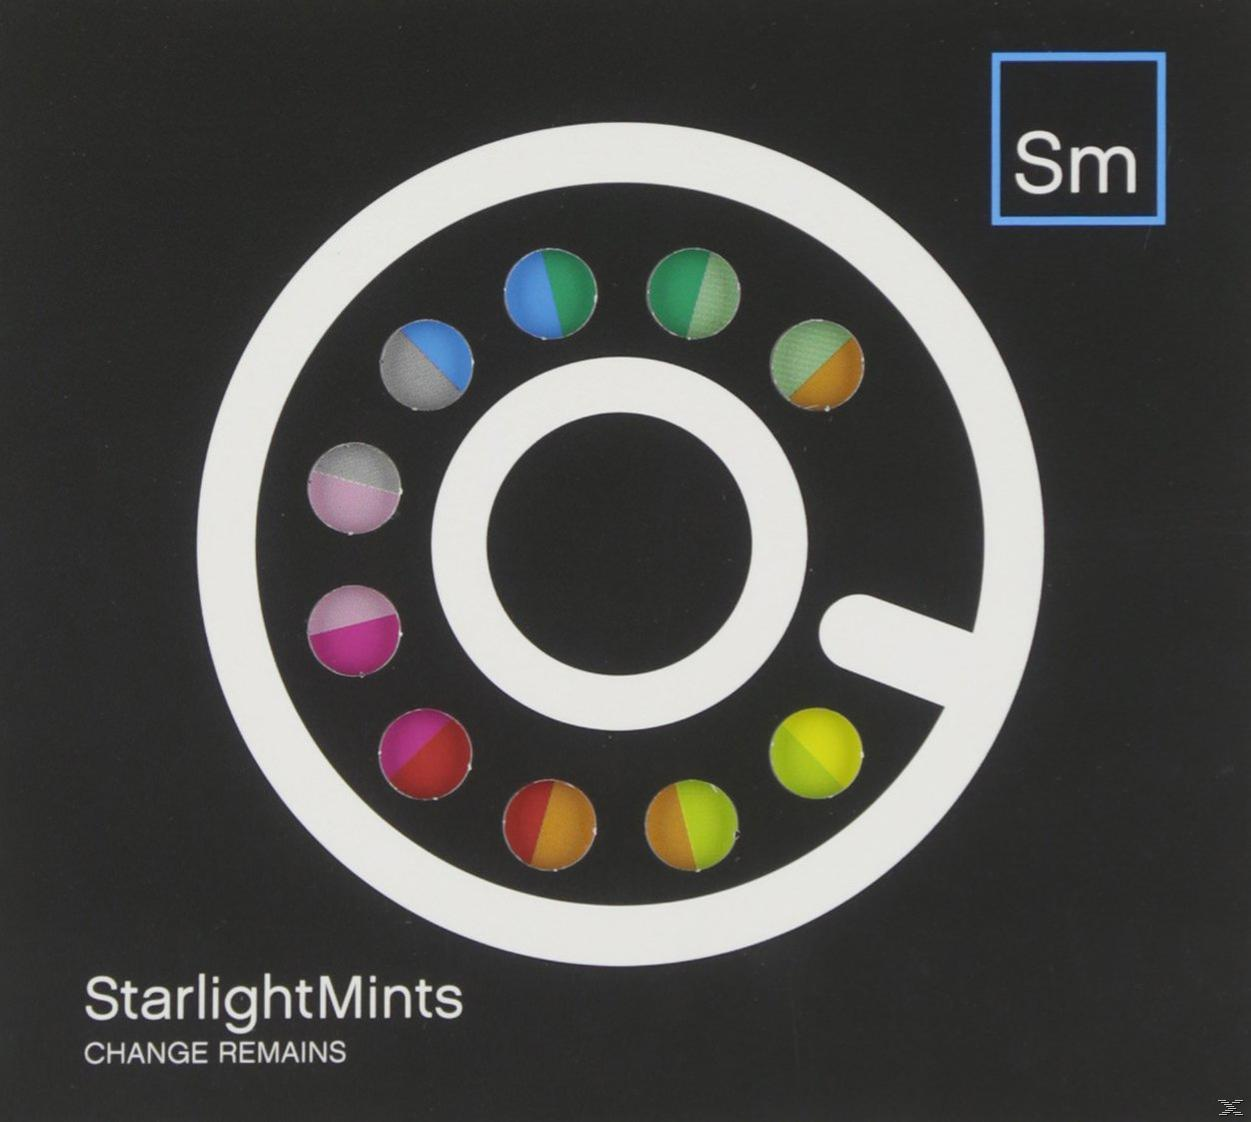 Change Starlight Mints (CD) - - Remains